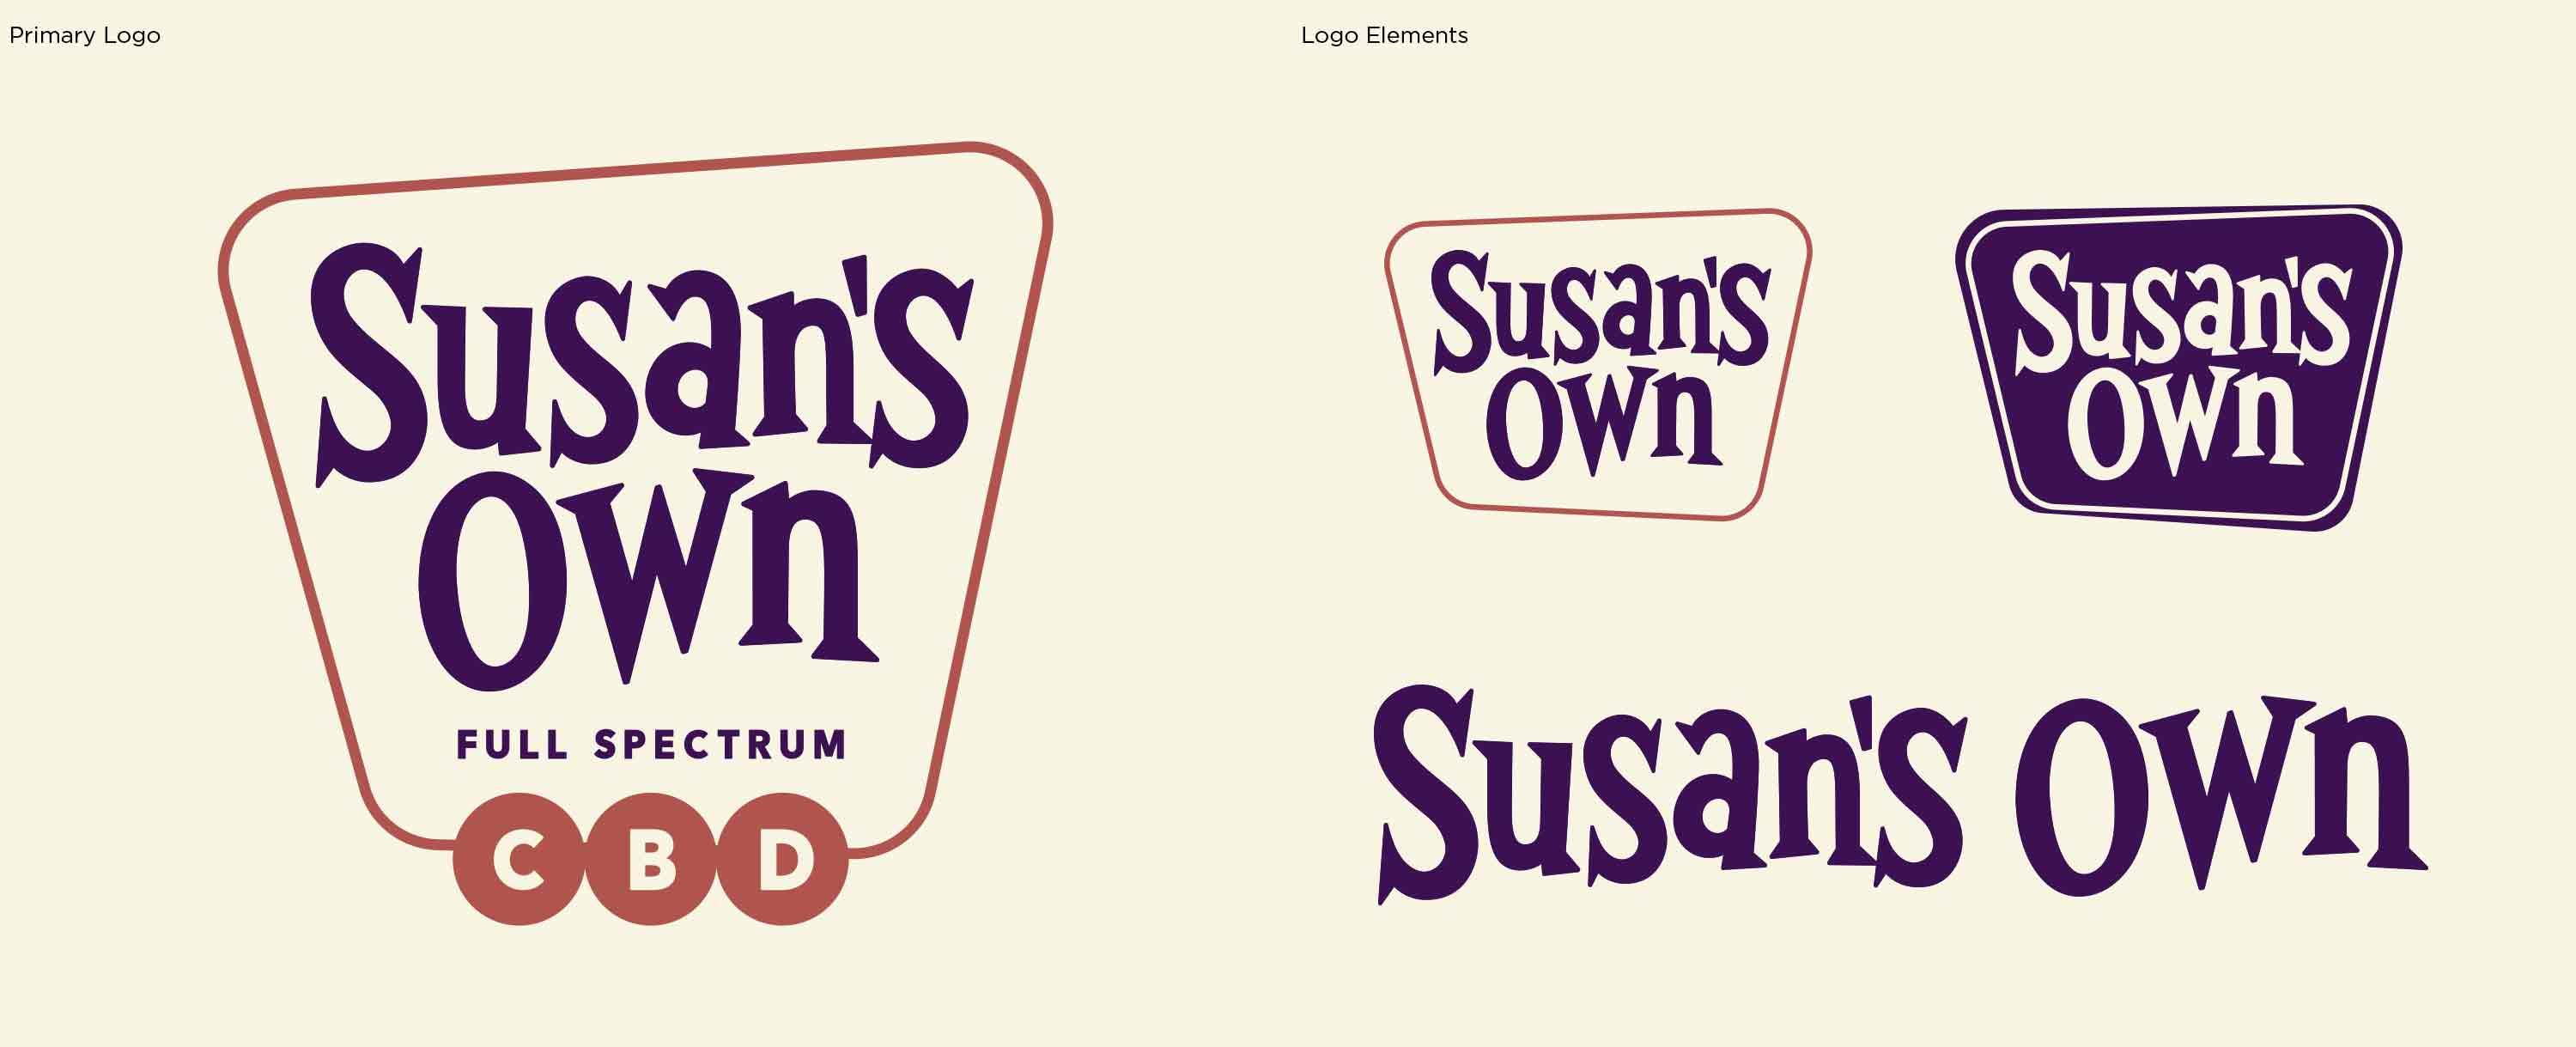 Susan's Own CBD Brand Elements - Design by SixAbove Studios